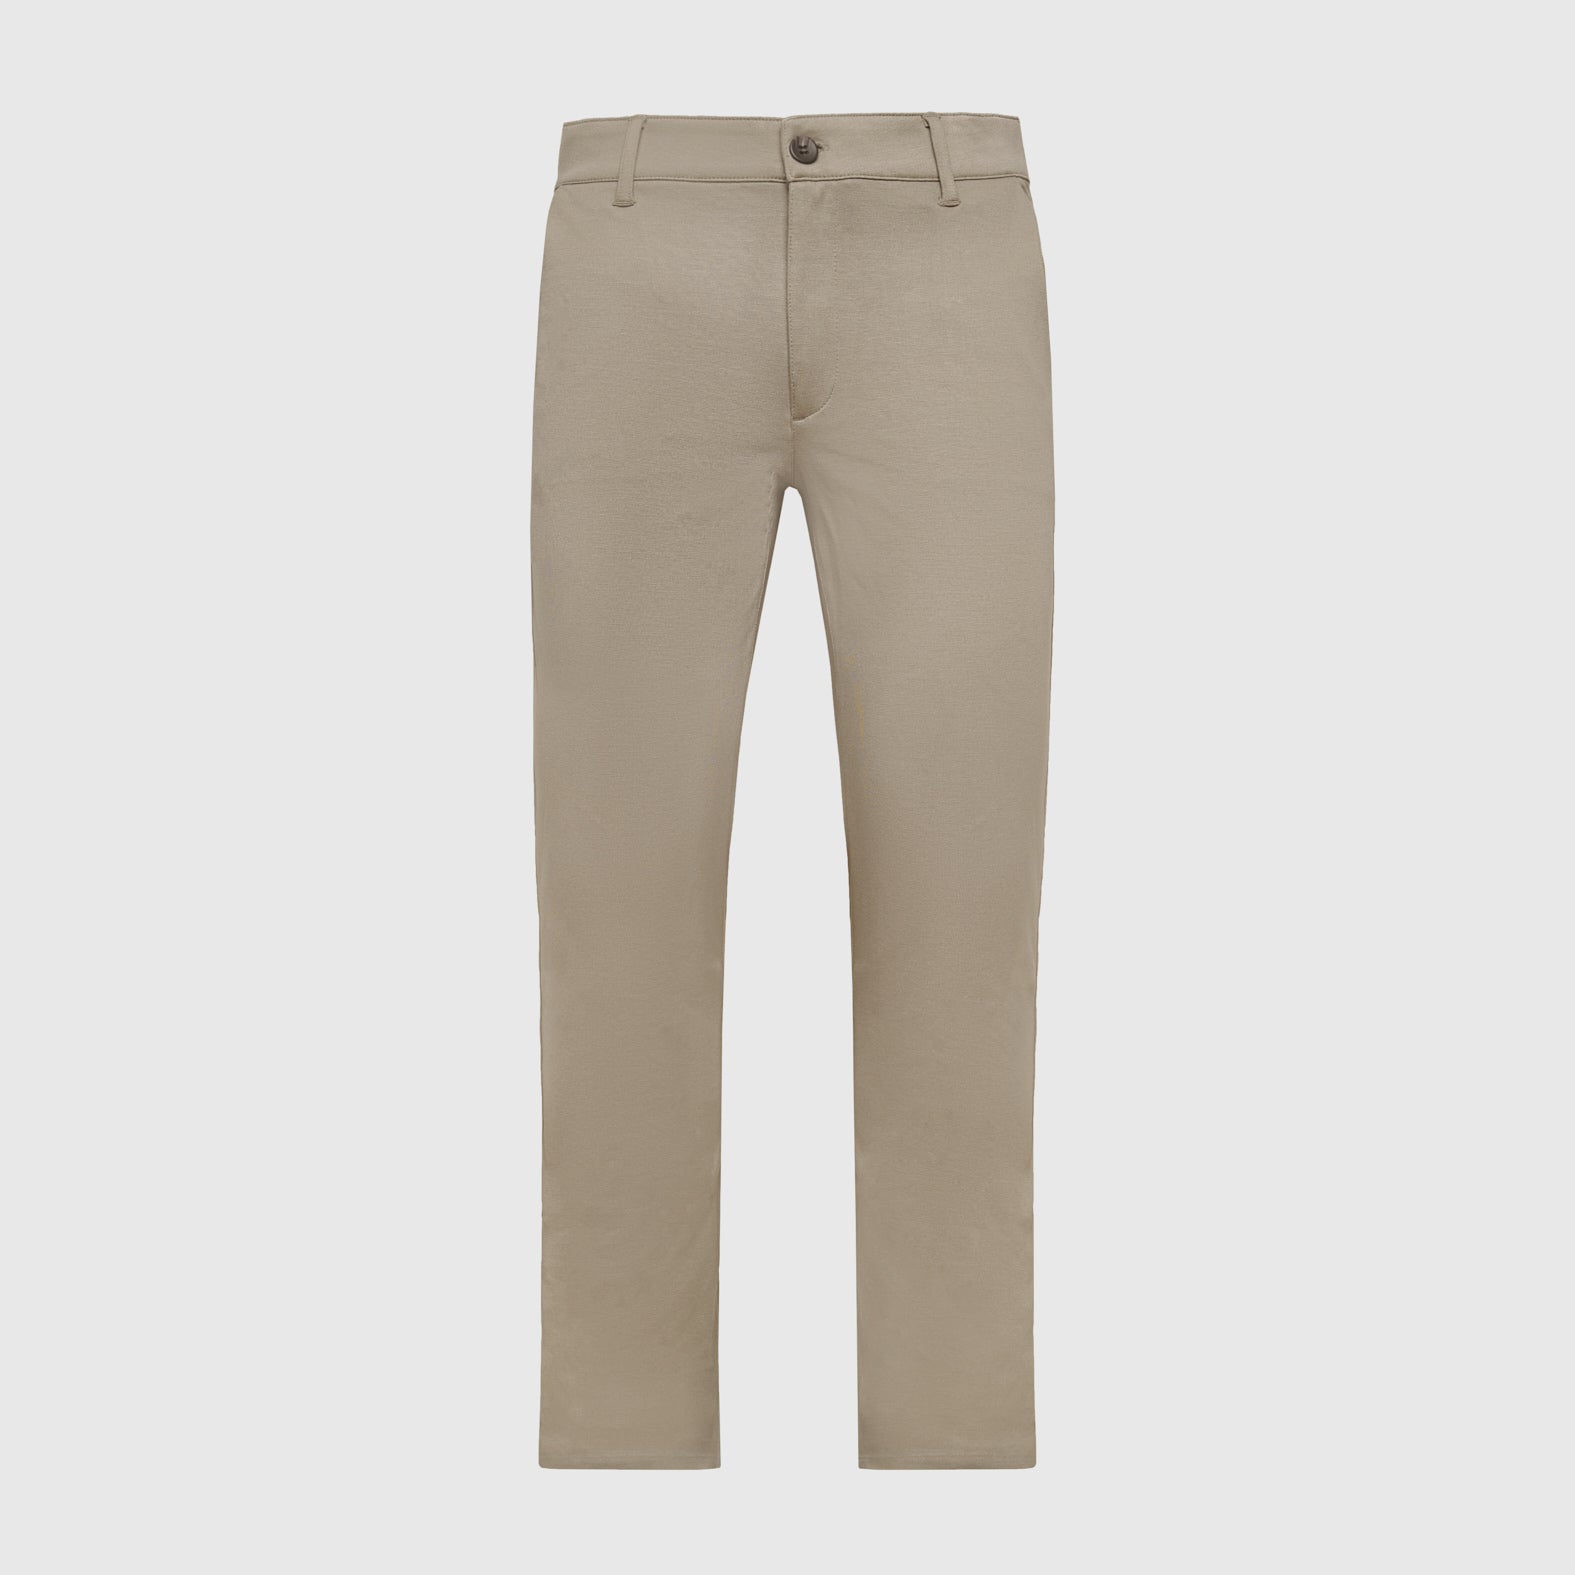 Men's Chinos - 20% Cashback On First Order With Signup – True Classic